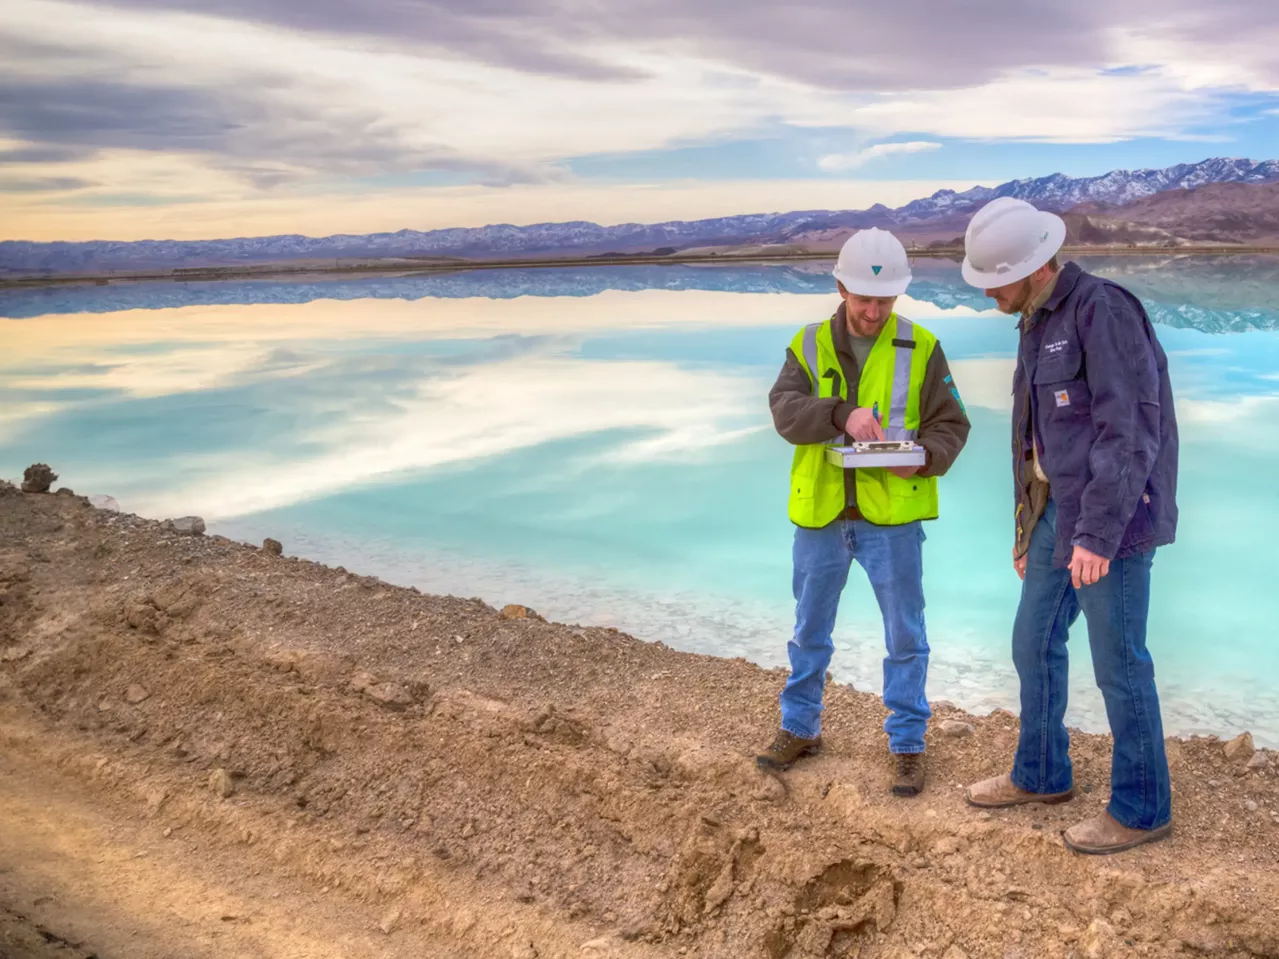 Two engineers in hard hats examine documents at a salt flat with mountains in the background, indicating a renewable energy project focusing on lithium extraction.